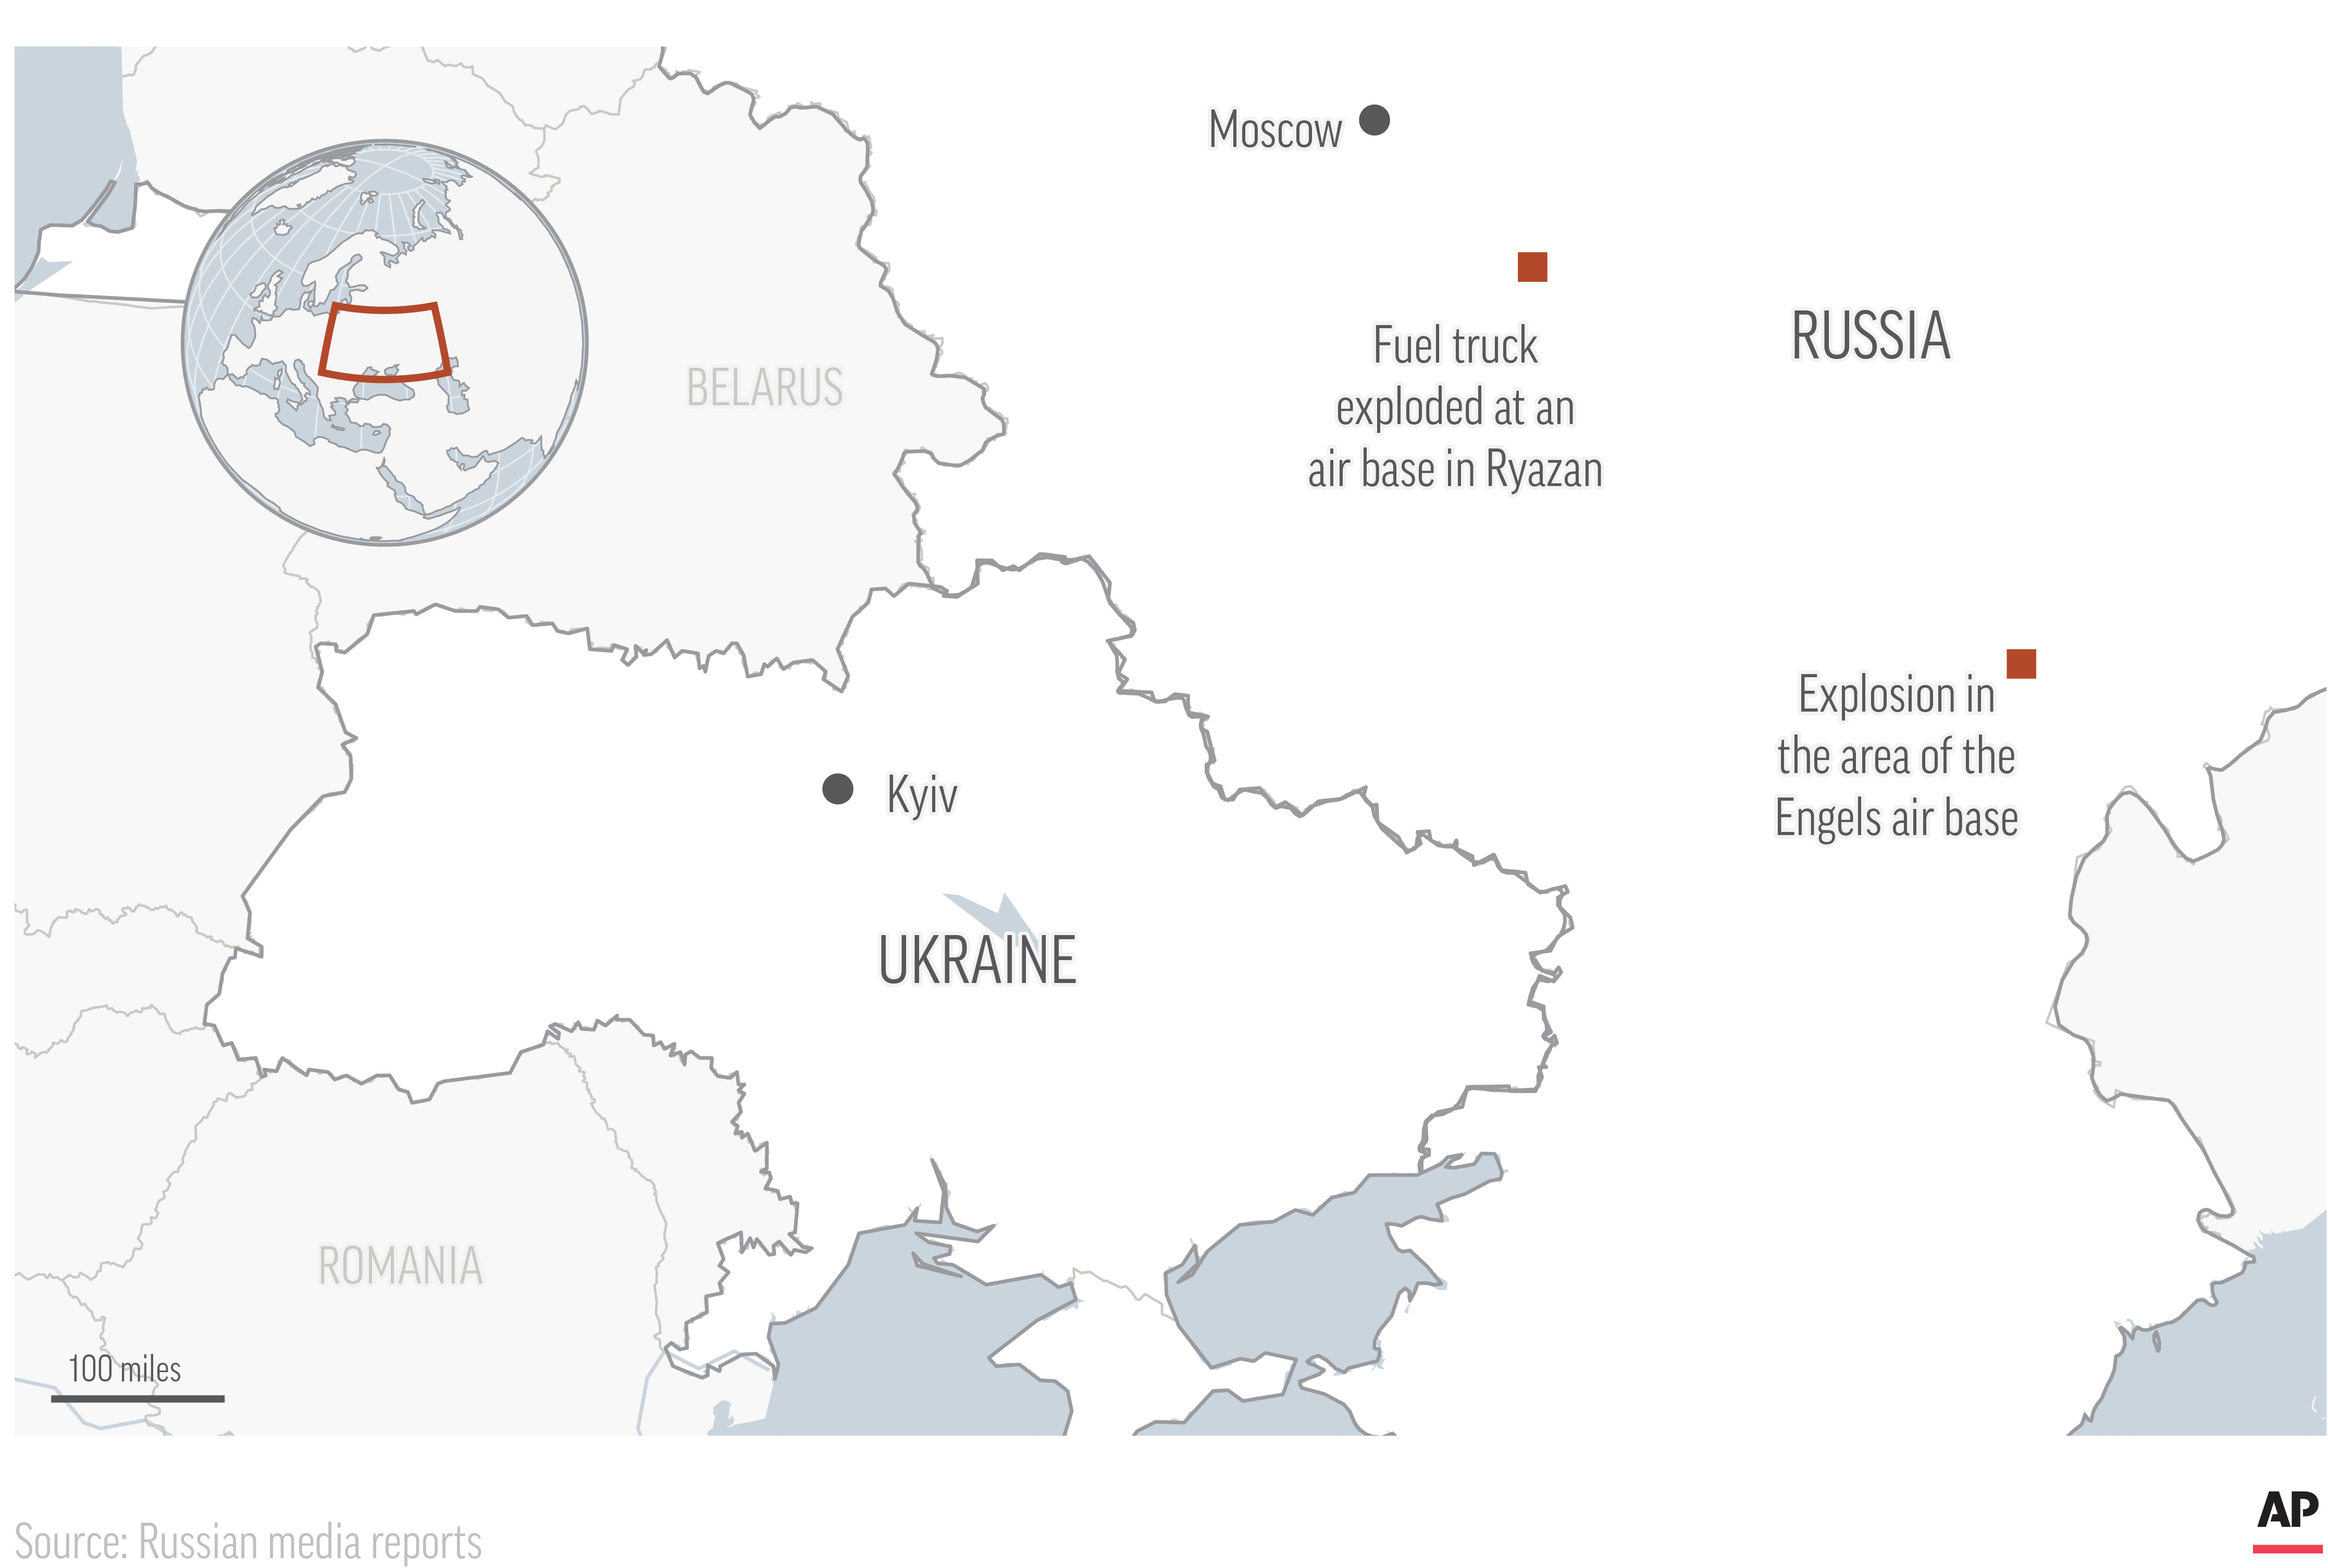 Two air bases in Russia were bombed on Monday